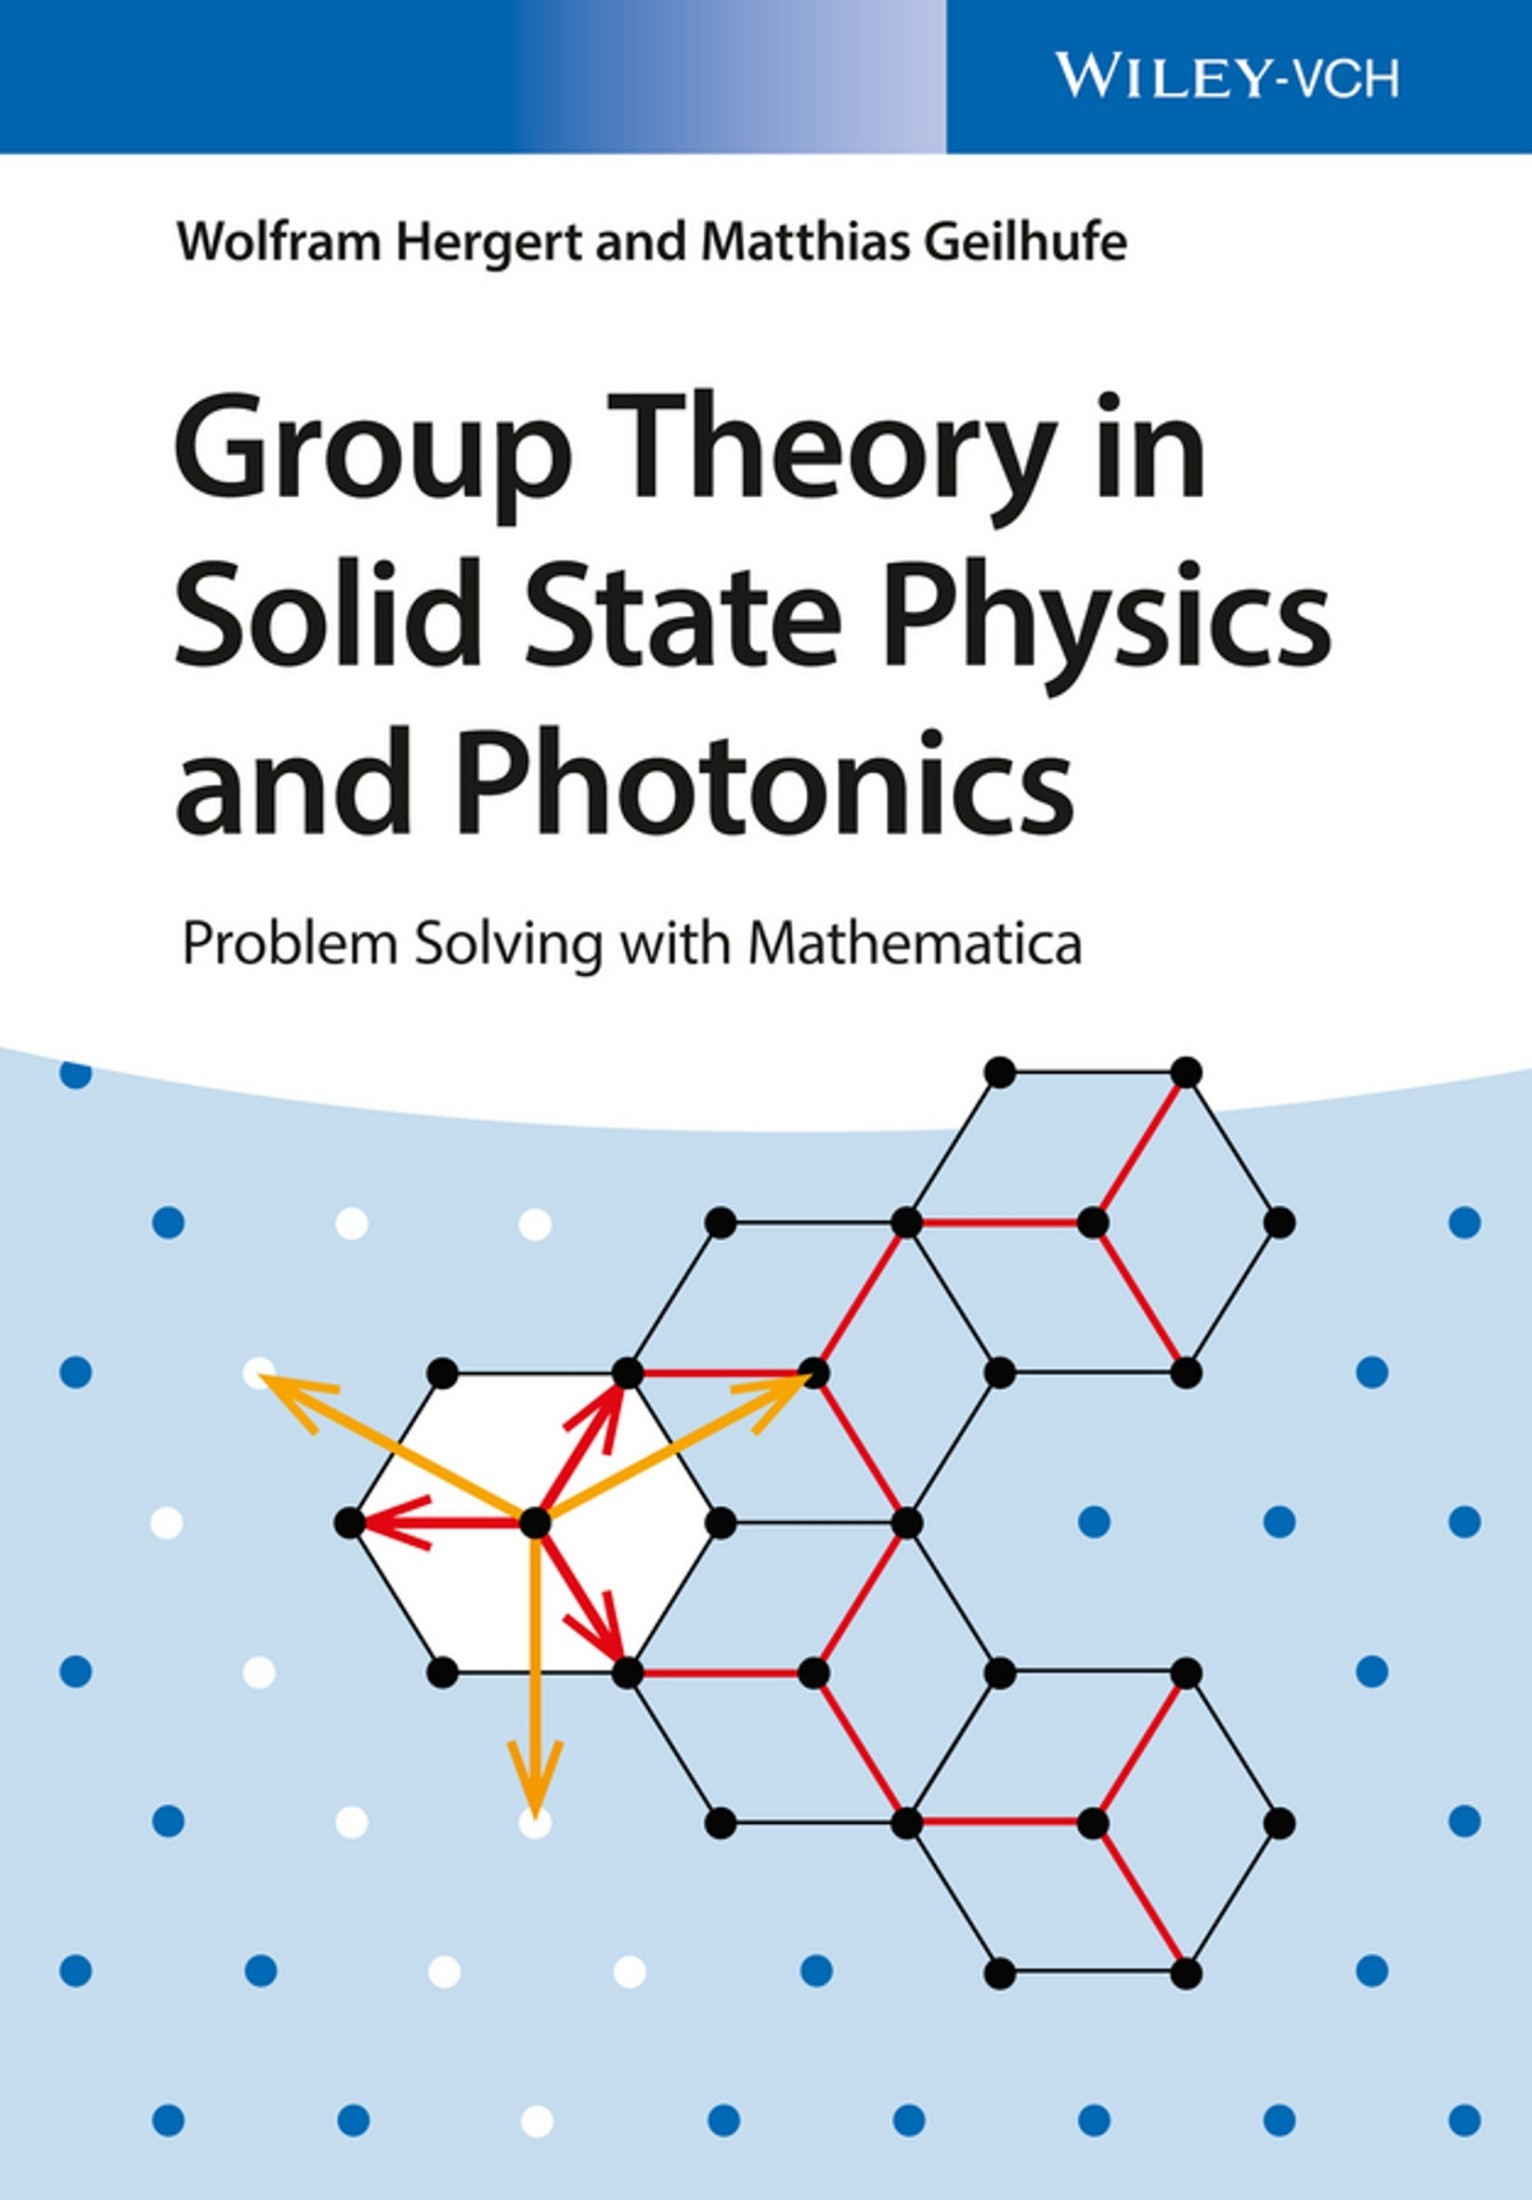 Group Theory in Solid State Physics and Photonics - Problem Solving with Mathematica®